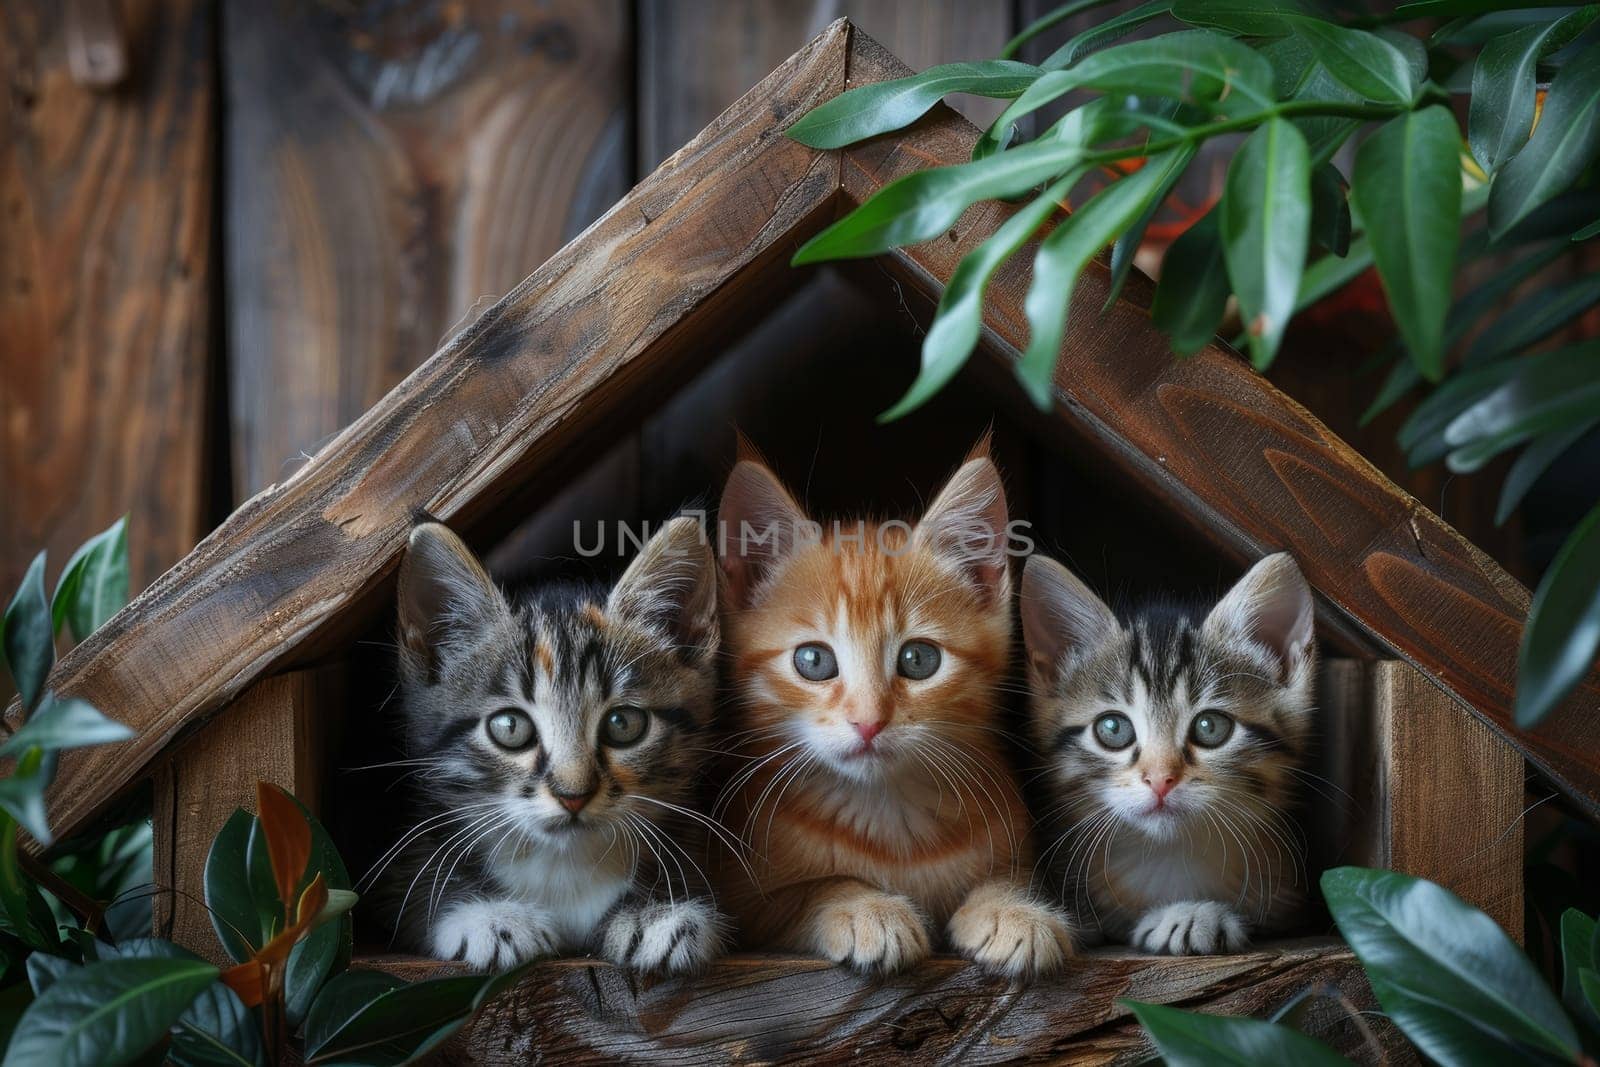 A group of cats are laying on a wooden structure.